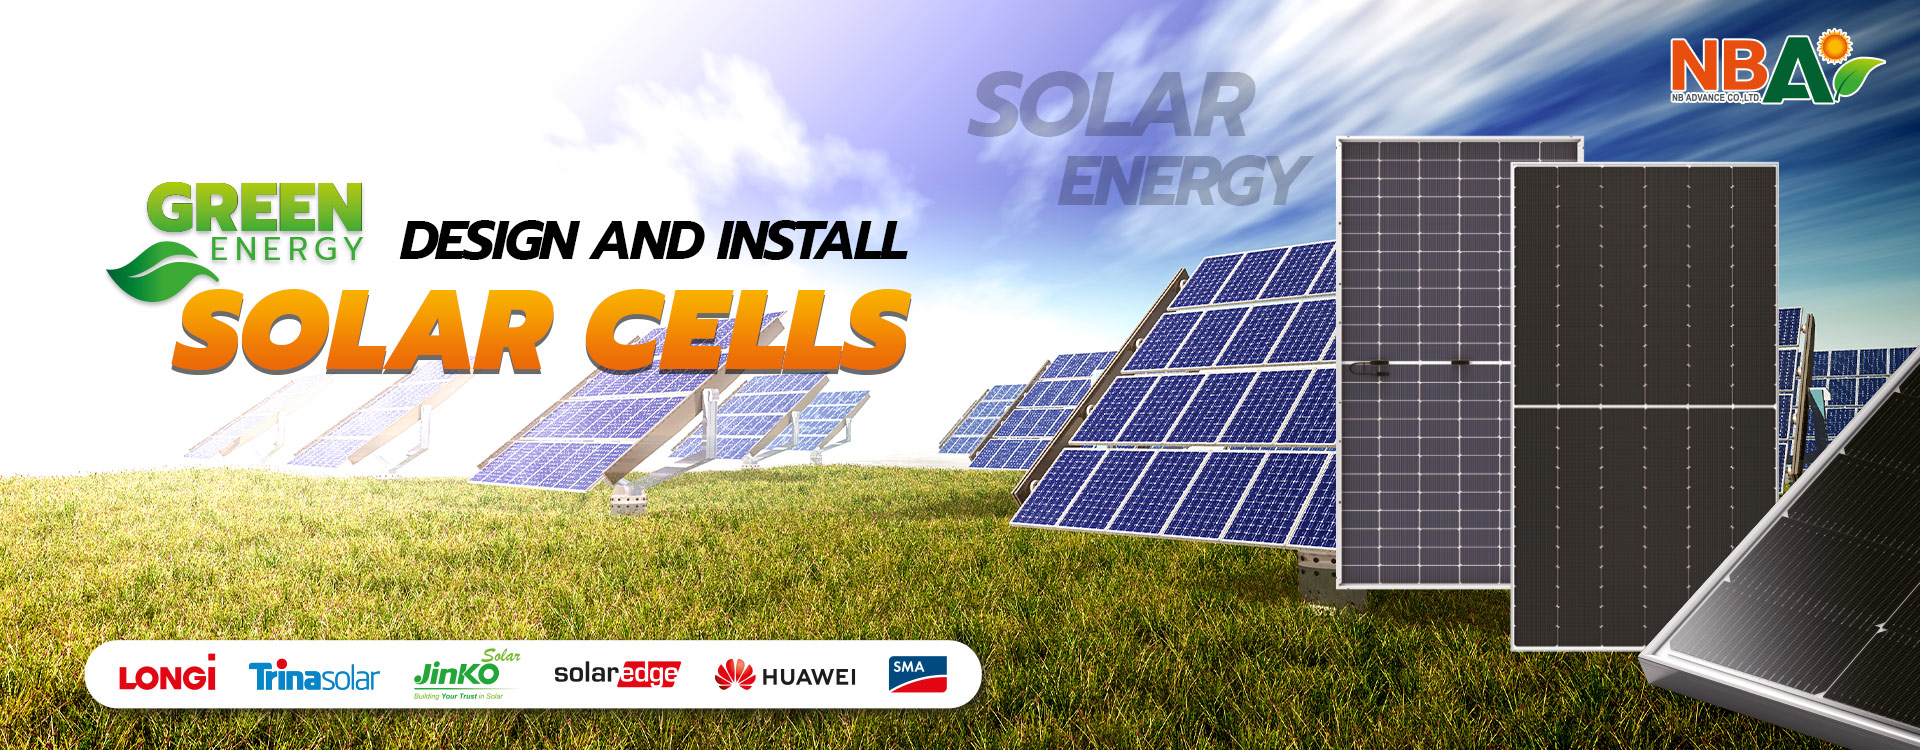 Design and install solar cells	